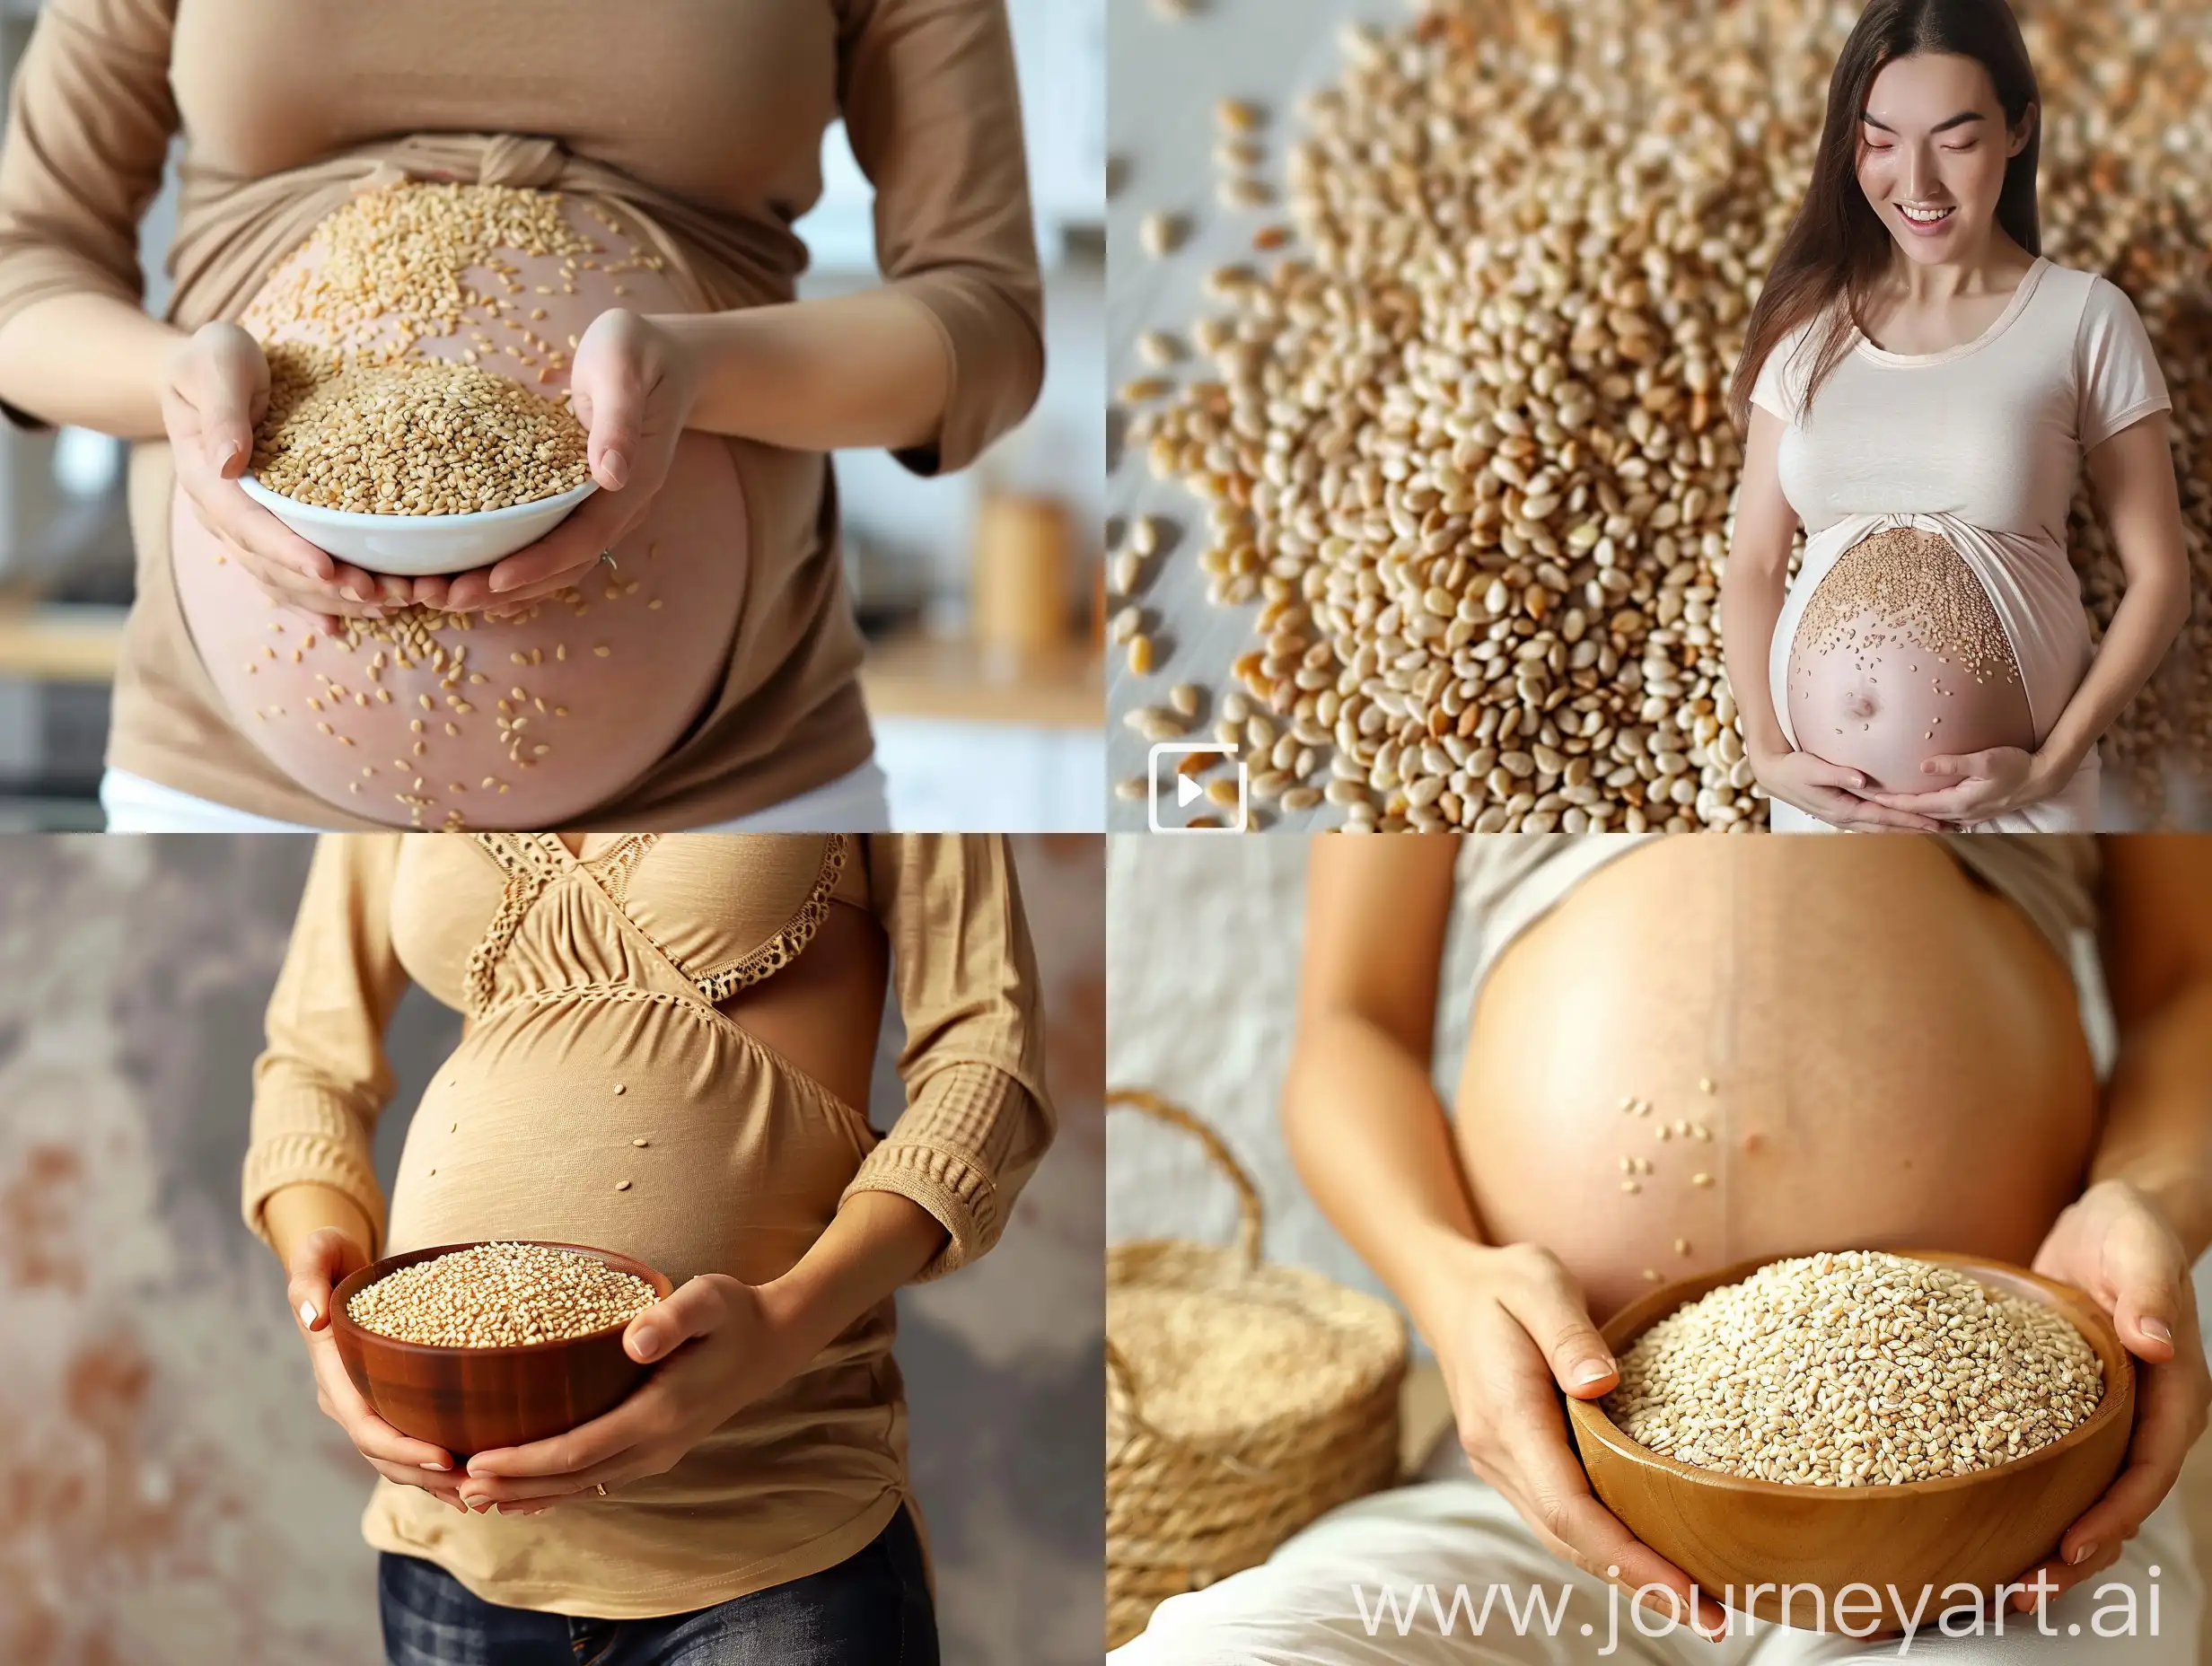 A photo of a pregnant woman with sesame seeds